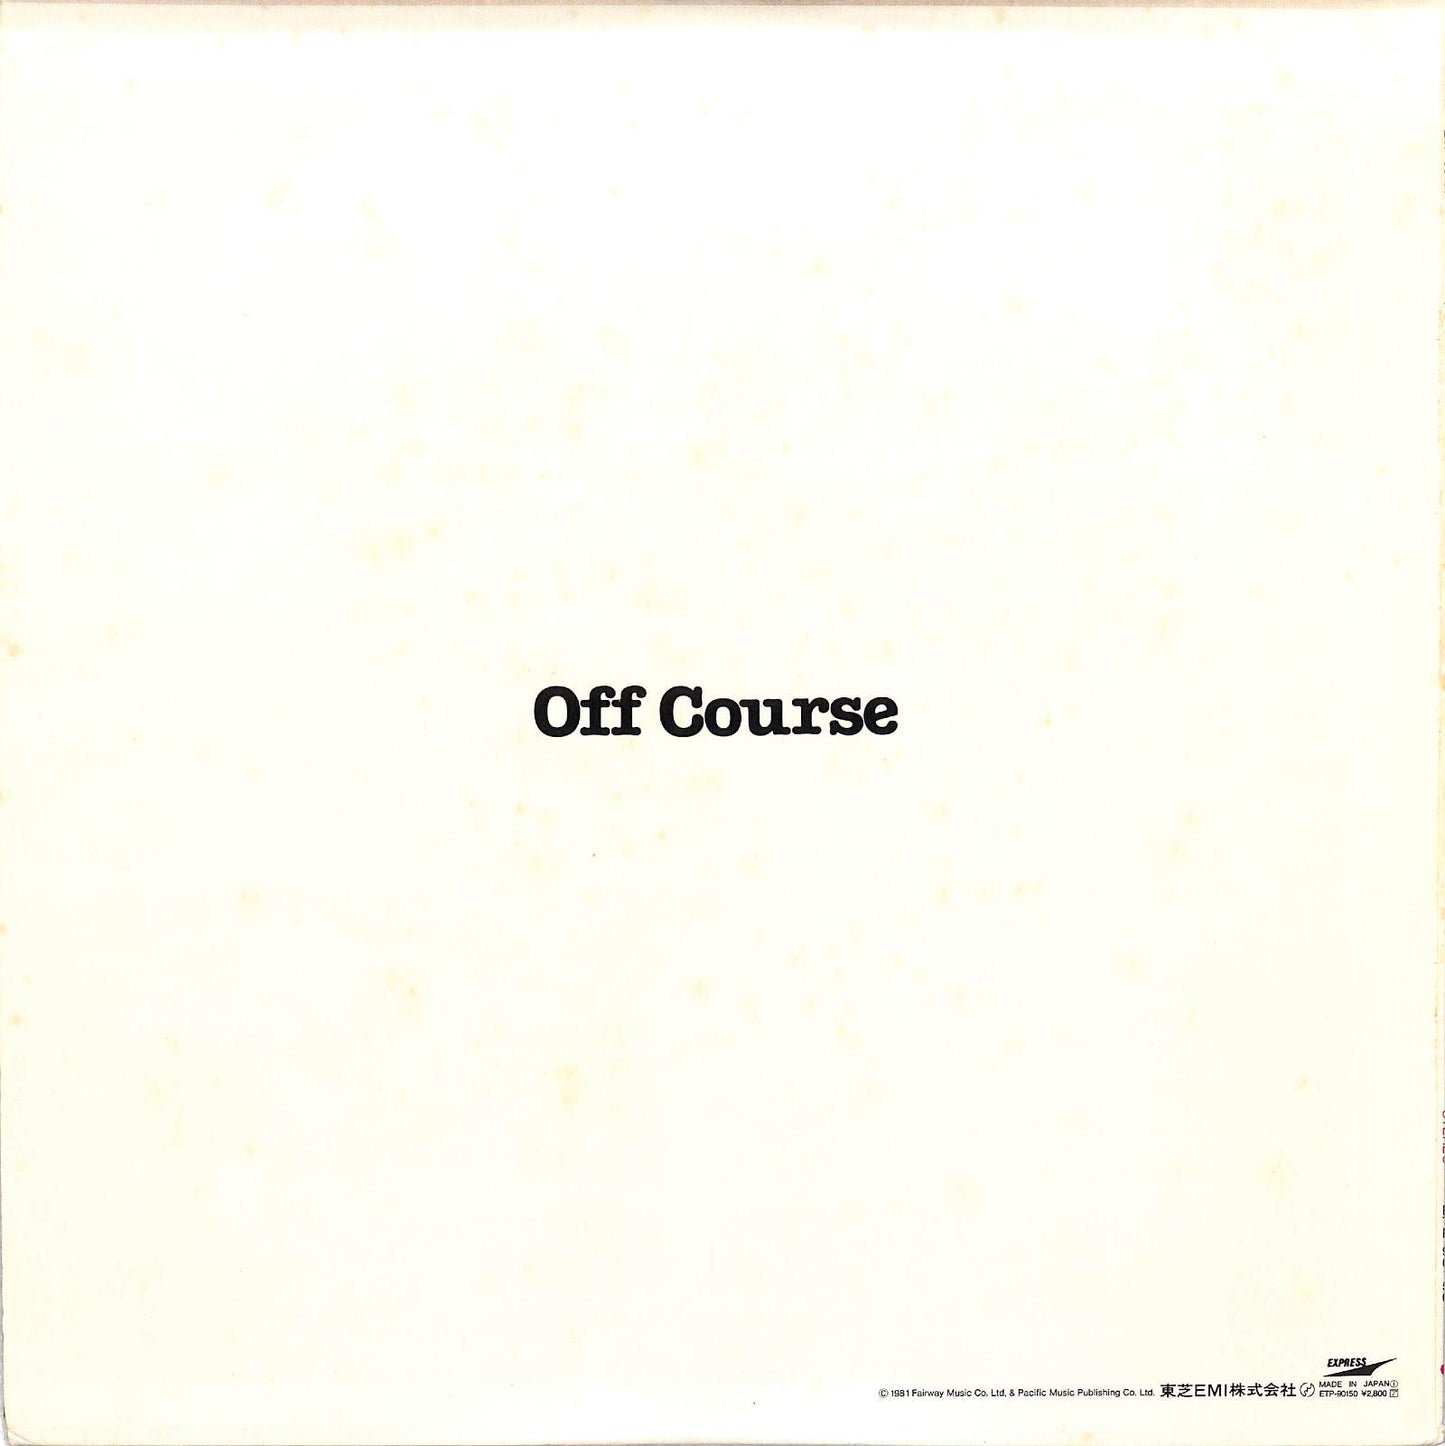 OFF COURSE - Over